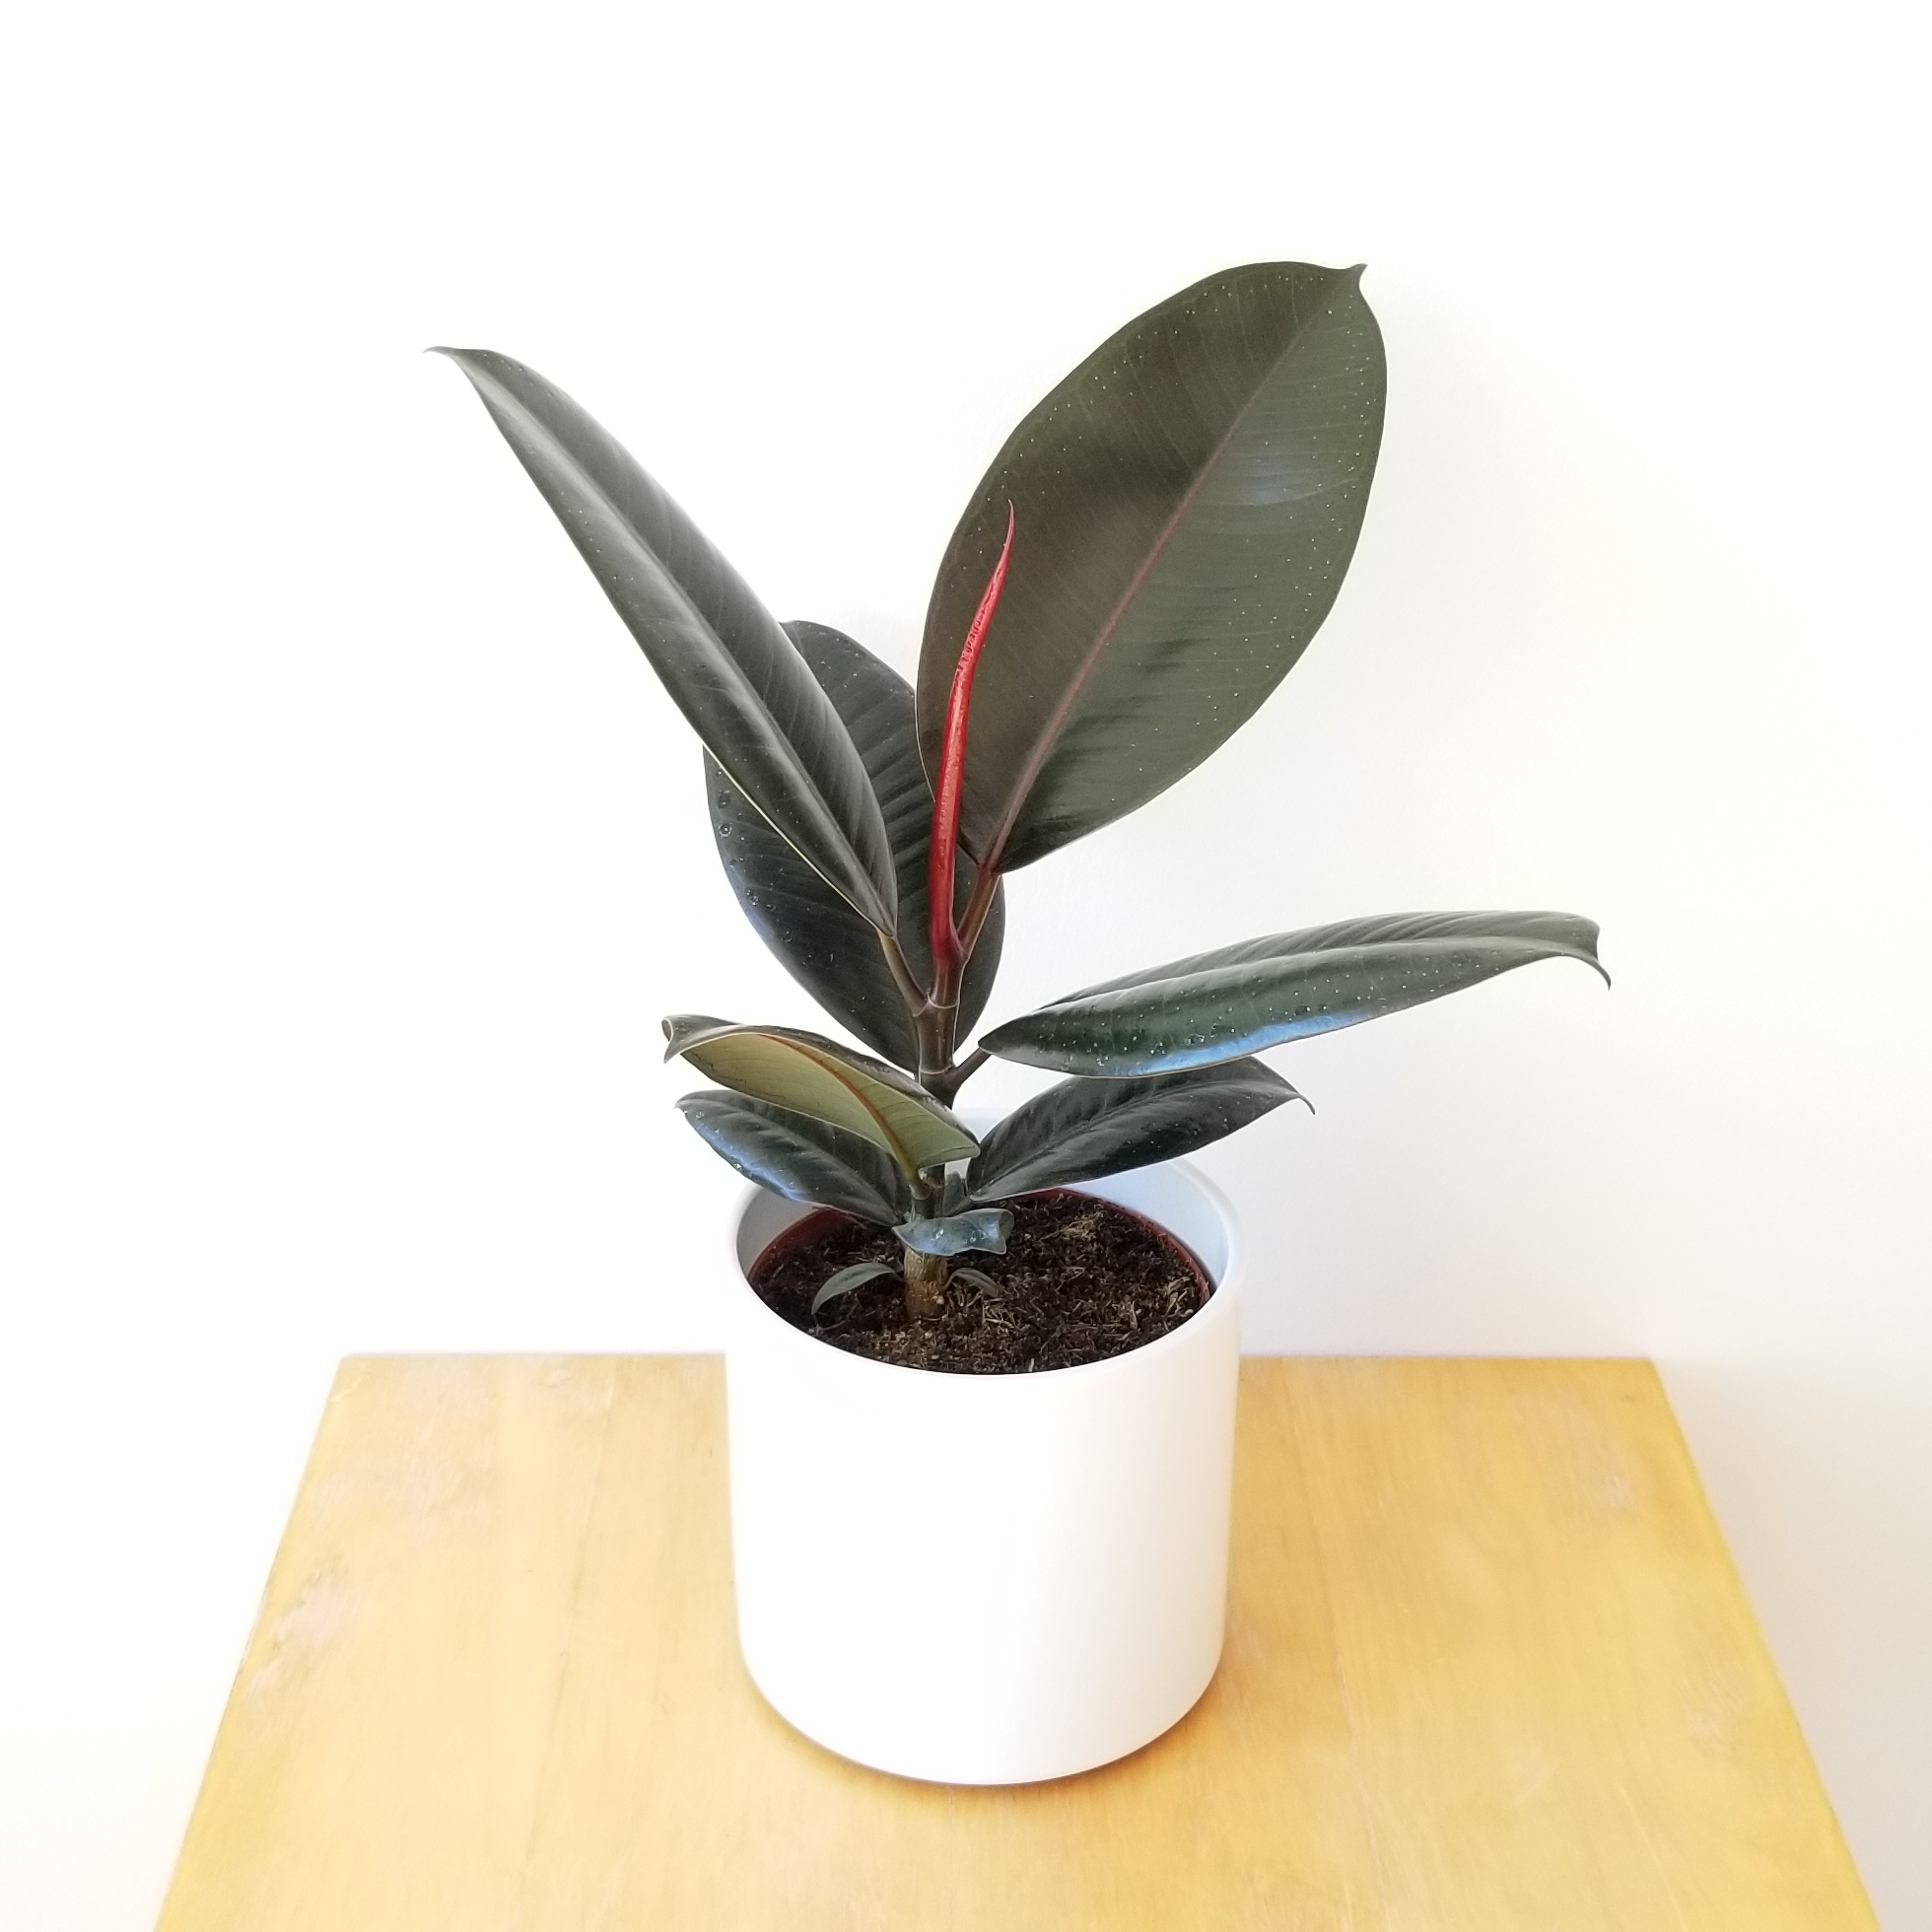 Buy Rubber Tree, Rubber Plant, Ficus elastica - Plant online from